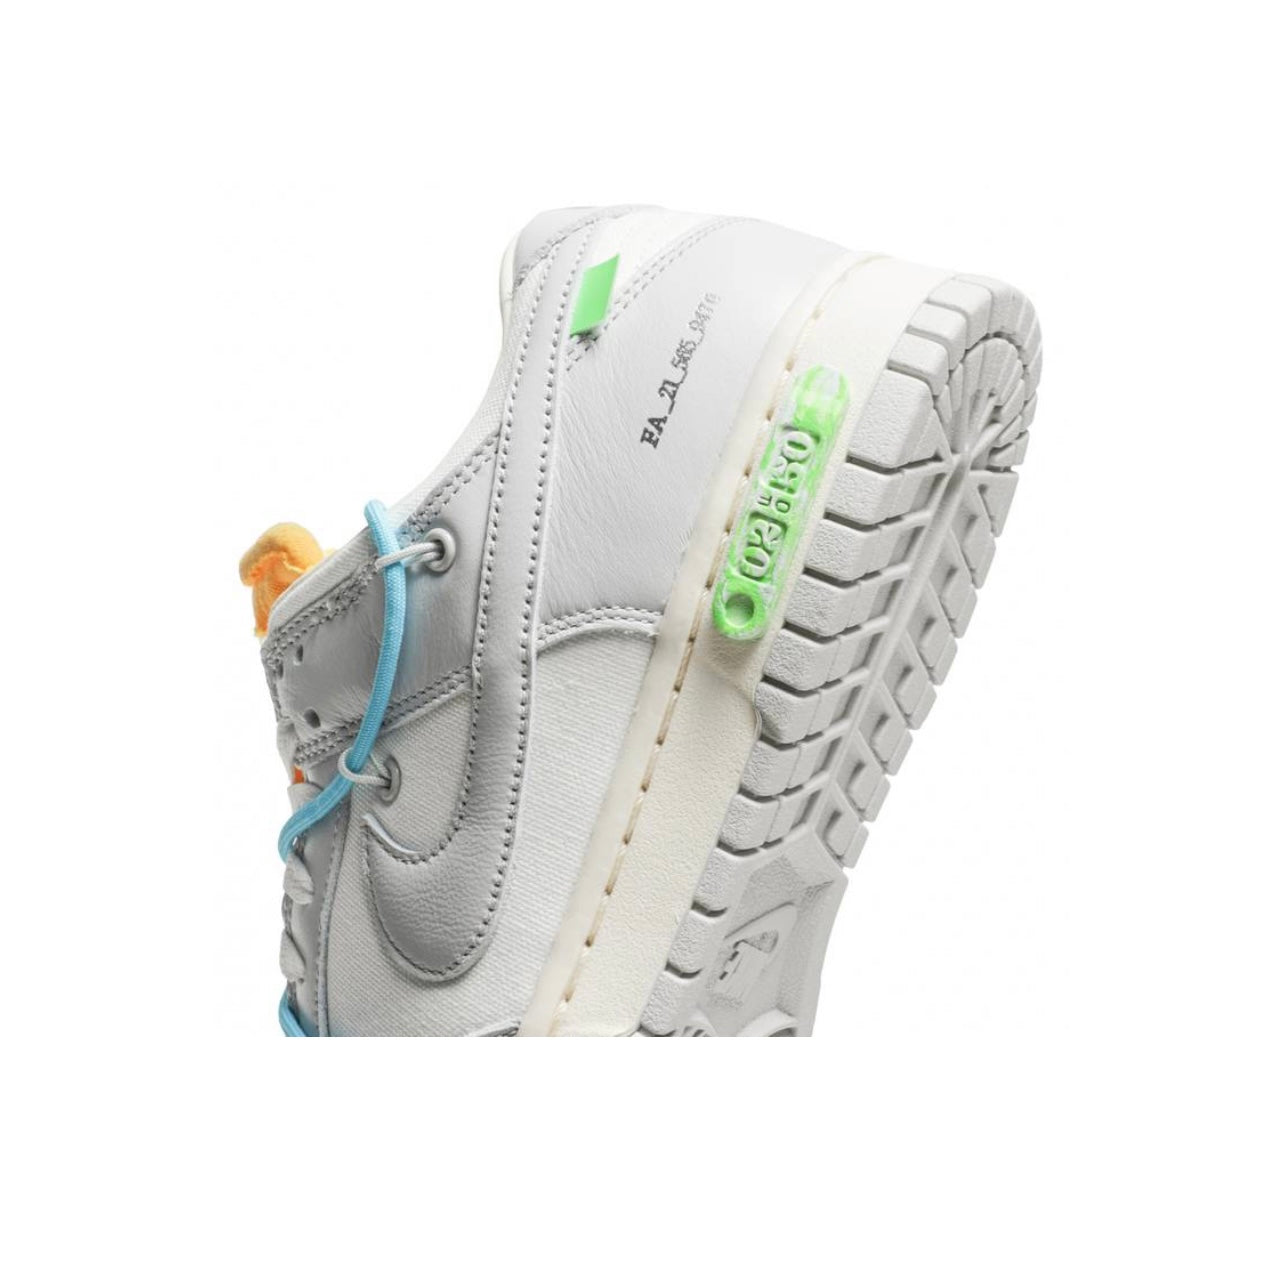 Off white x Nike Dunk "The 50" Collection